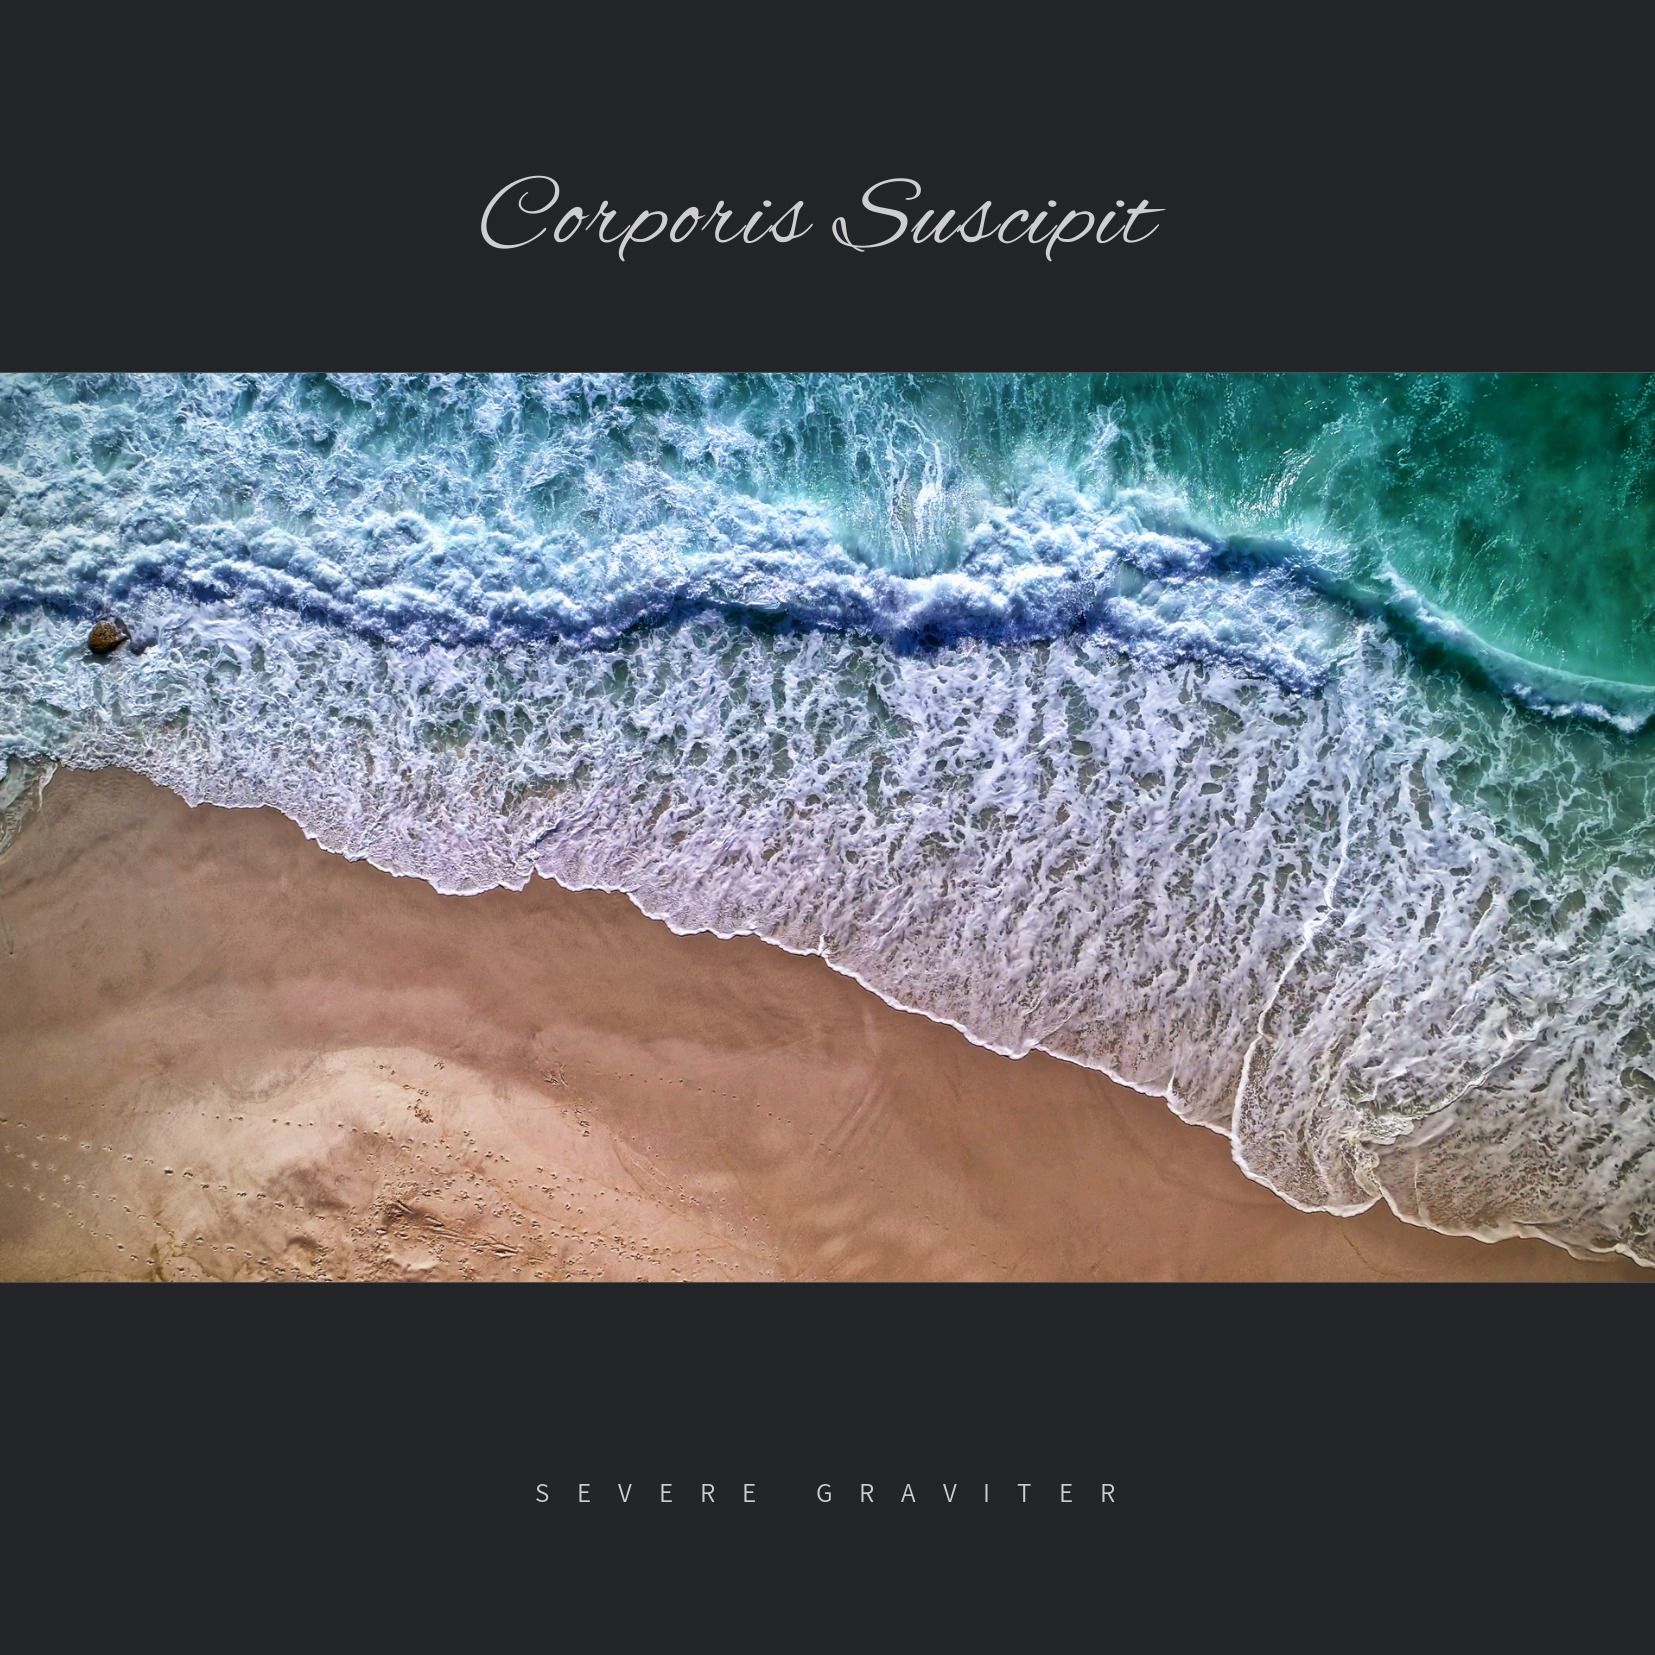 Waves rolling over a sandy beach with text - Marine images in the album cover design - Image